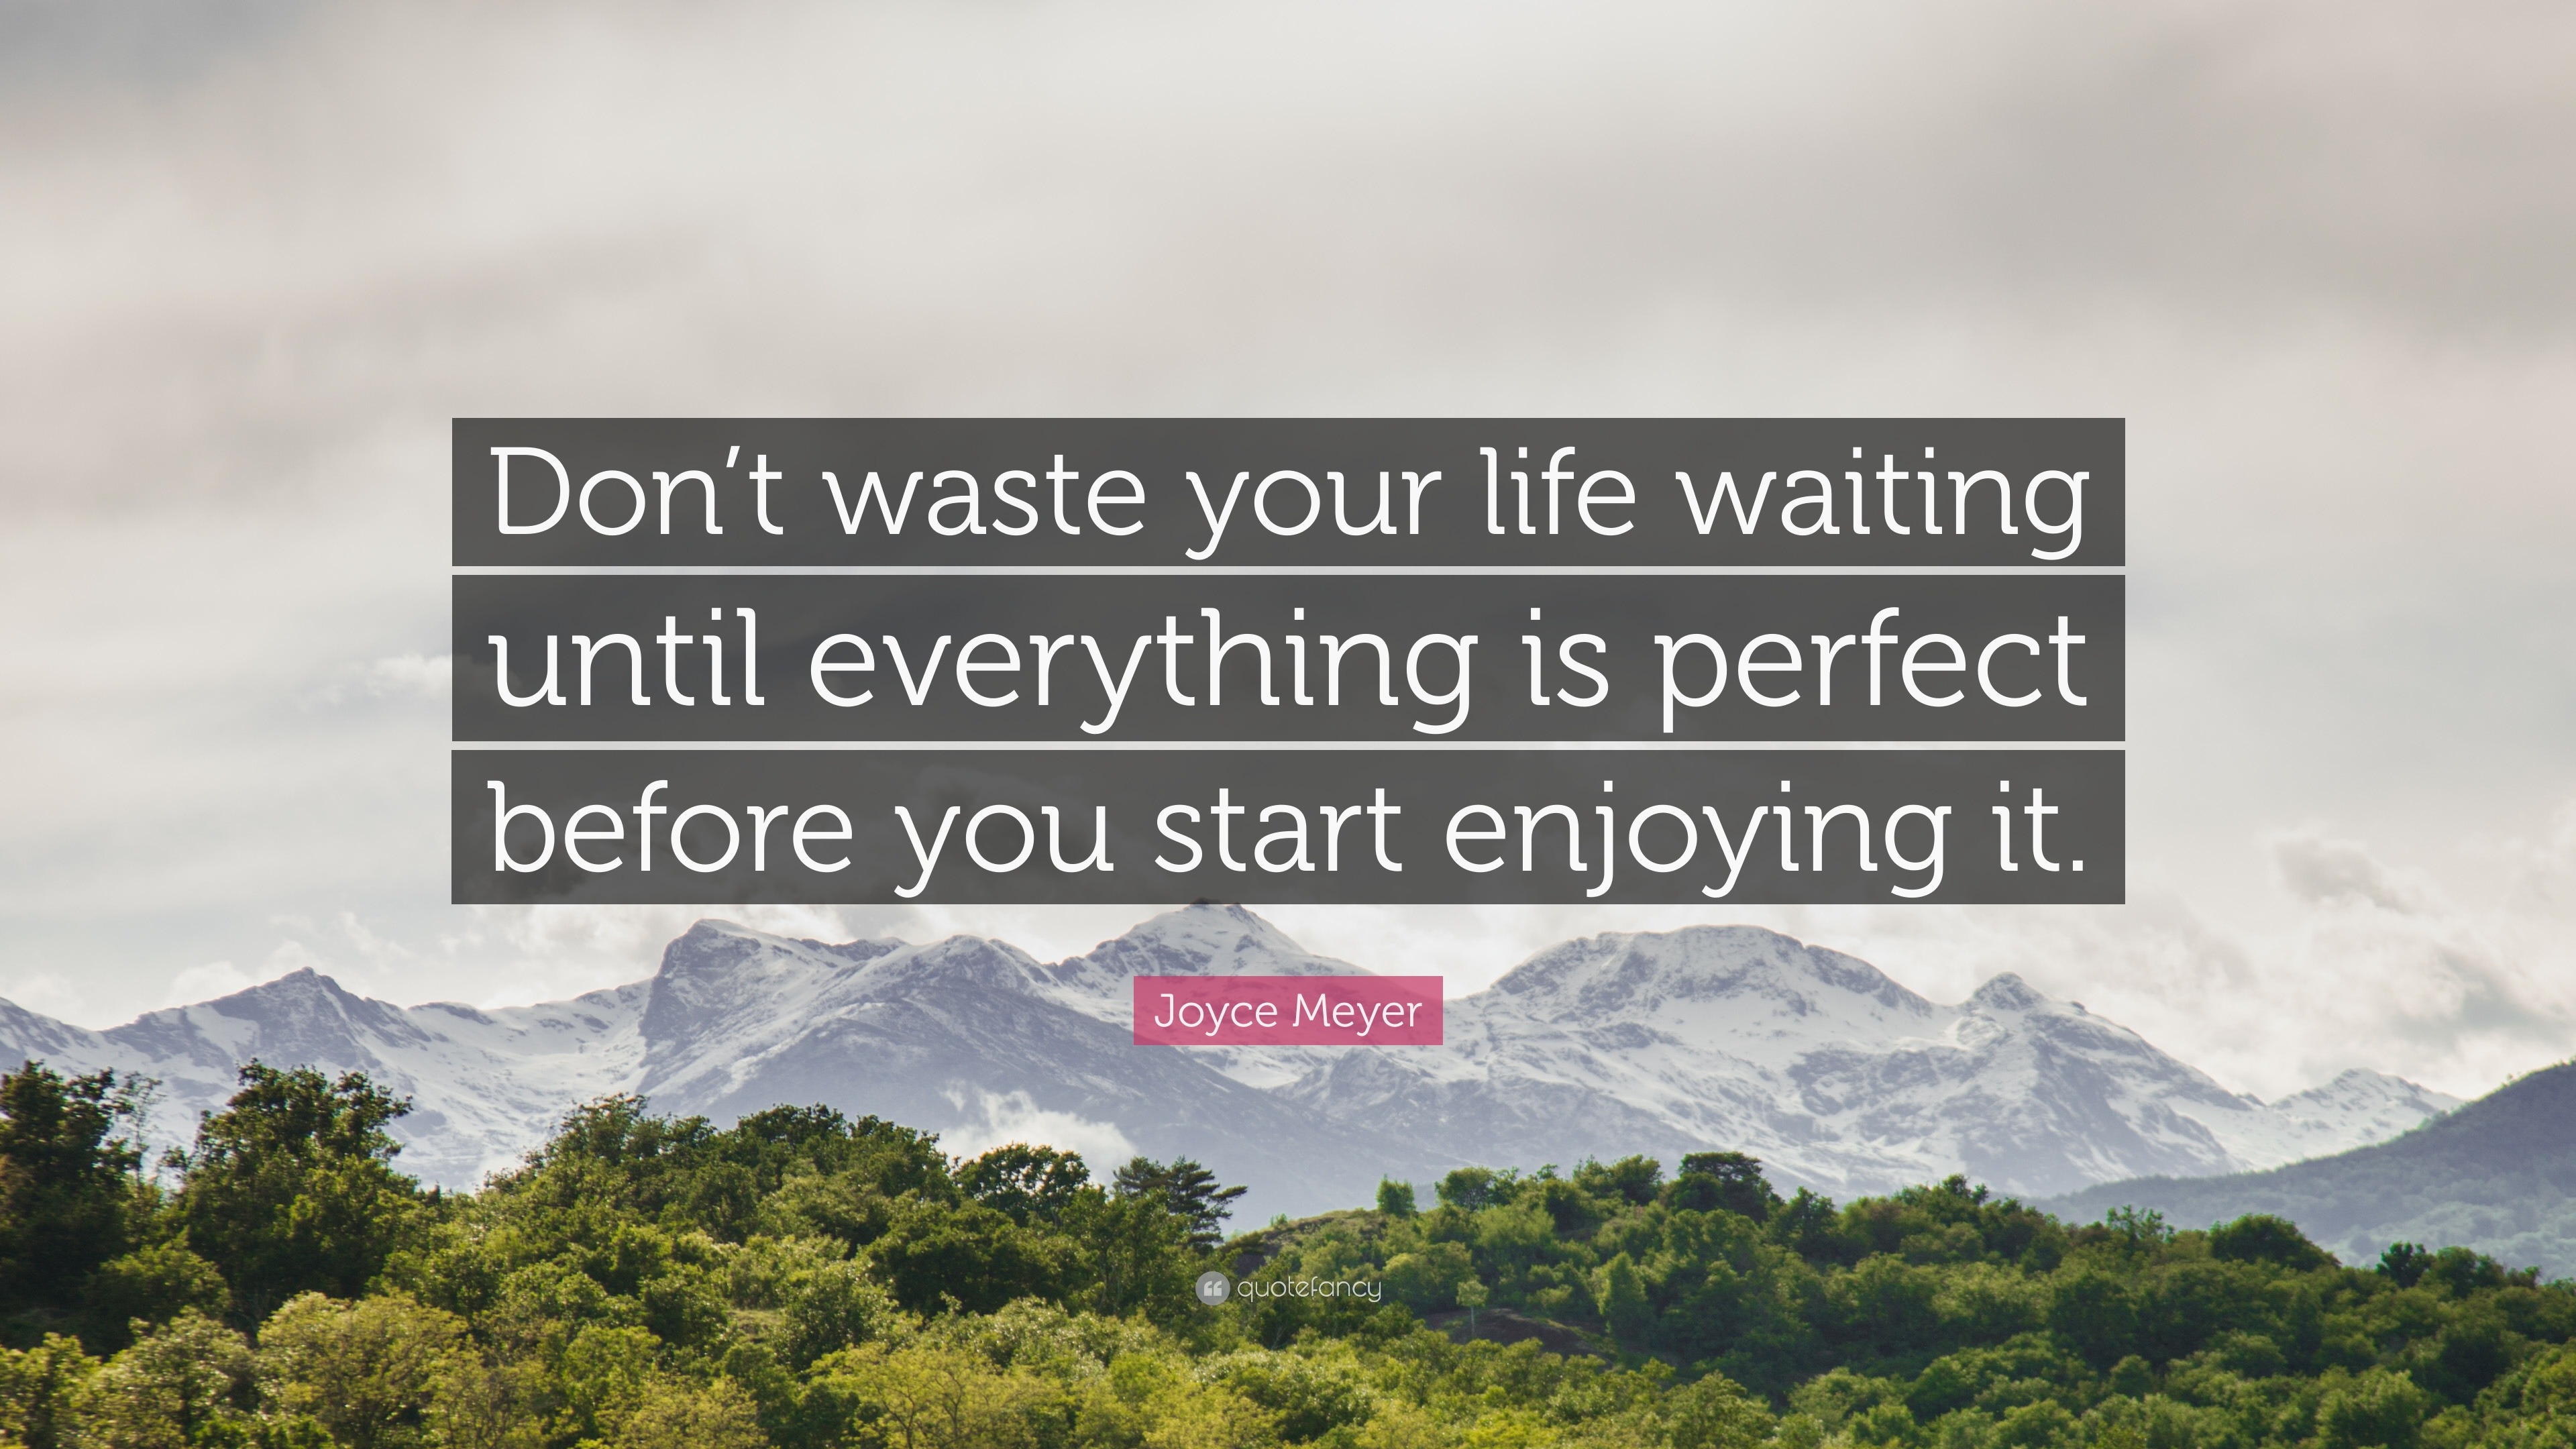 Joyce Meyer Quote “Don t waste your life waiting until everything is perfect